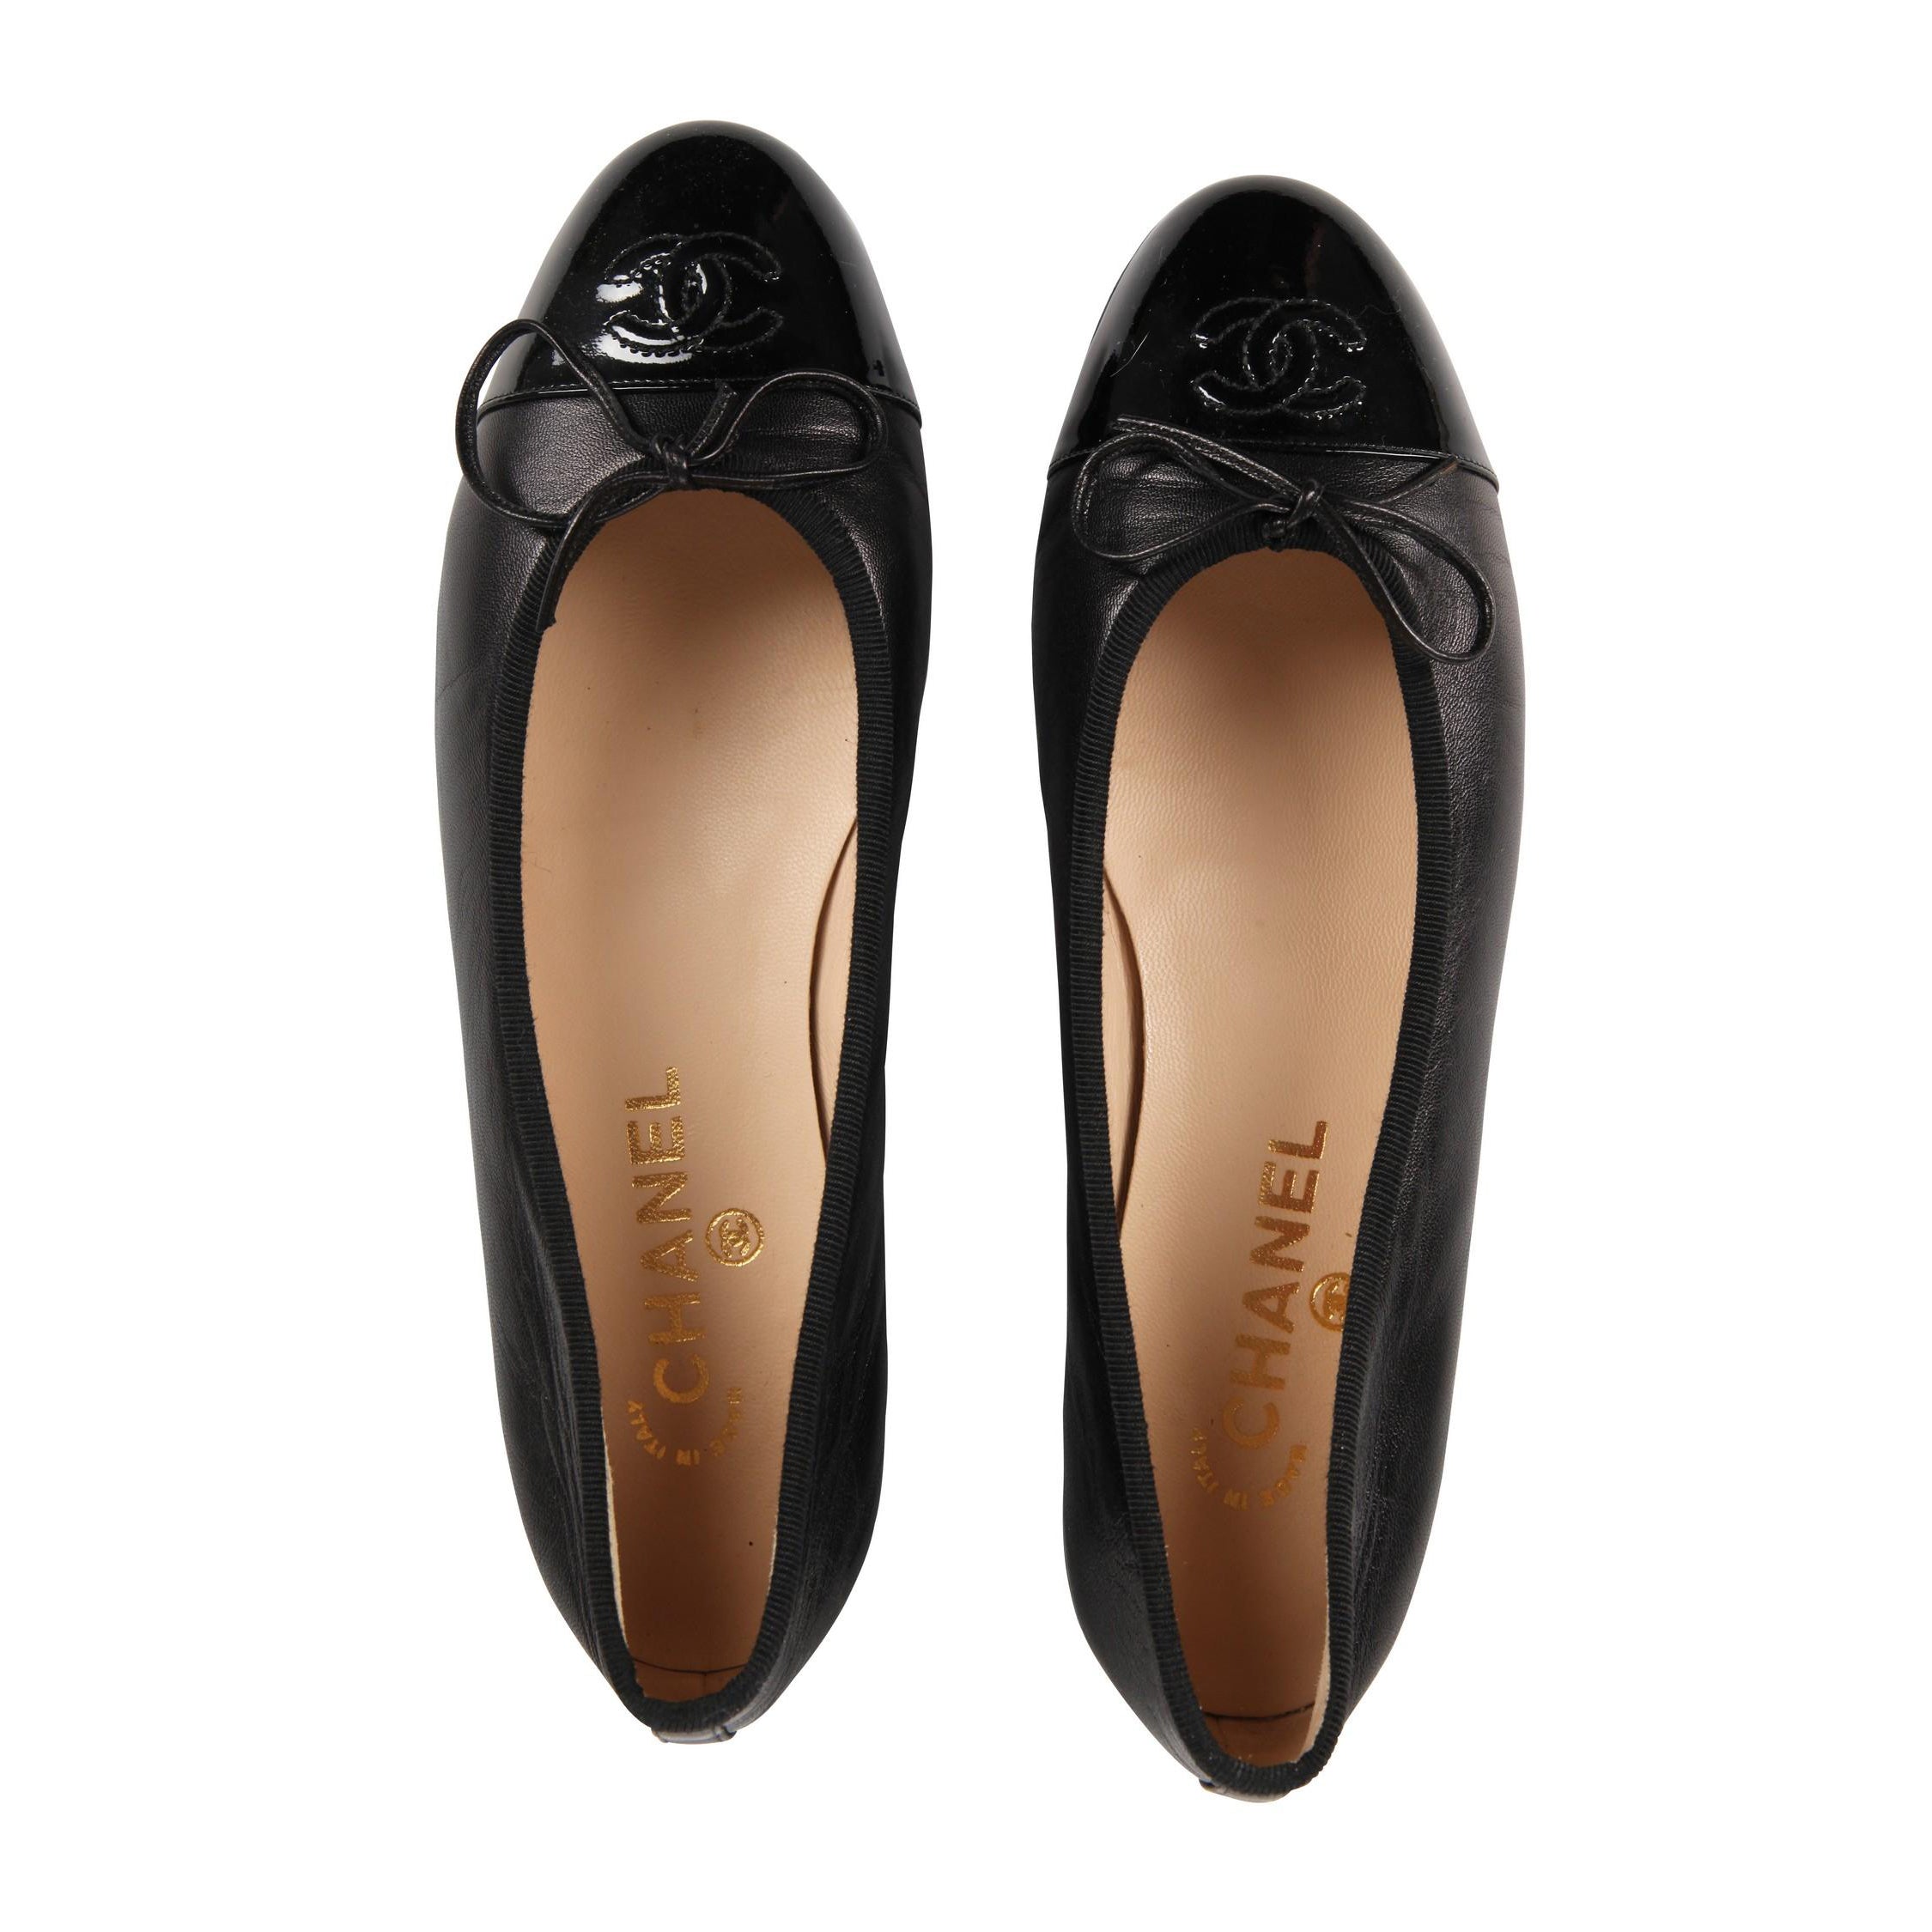 Leather ballet flats Chanel Black size 37.5 EU in Leather - 38992315